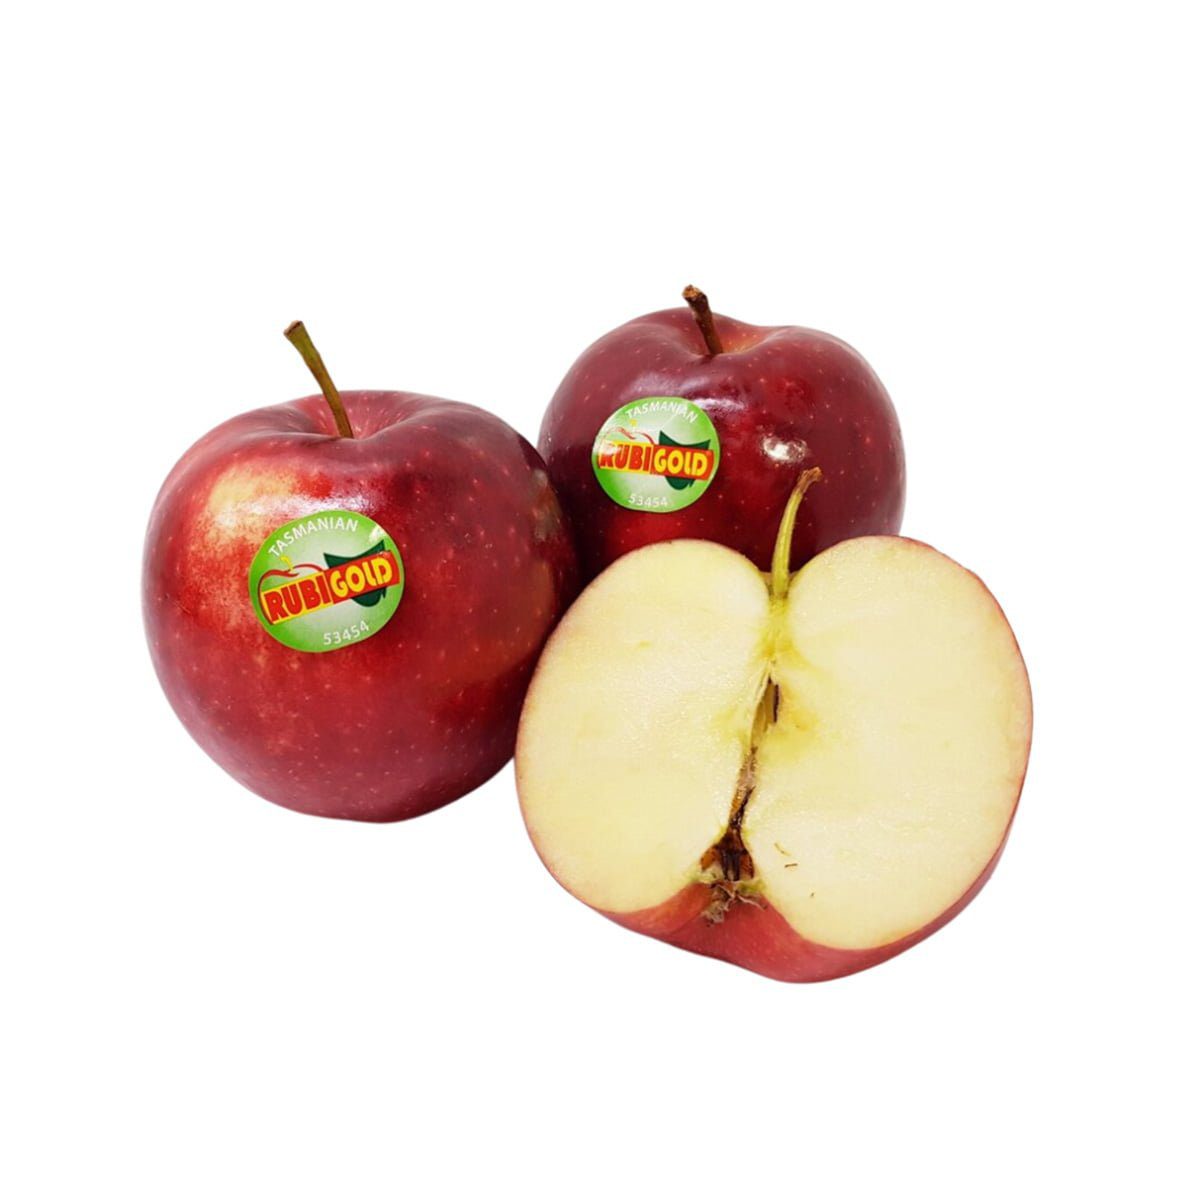 Fresh and Juicy Rubigold Apples (5 Pieces) - Fruits Express Delivery